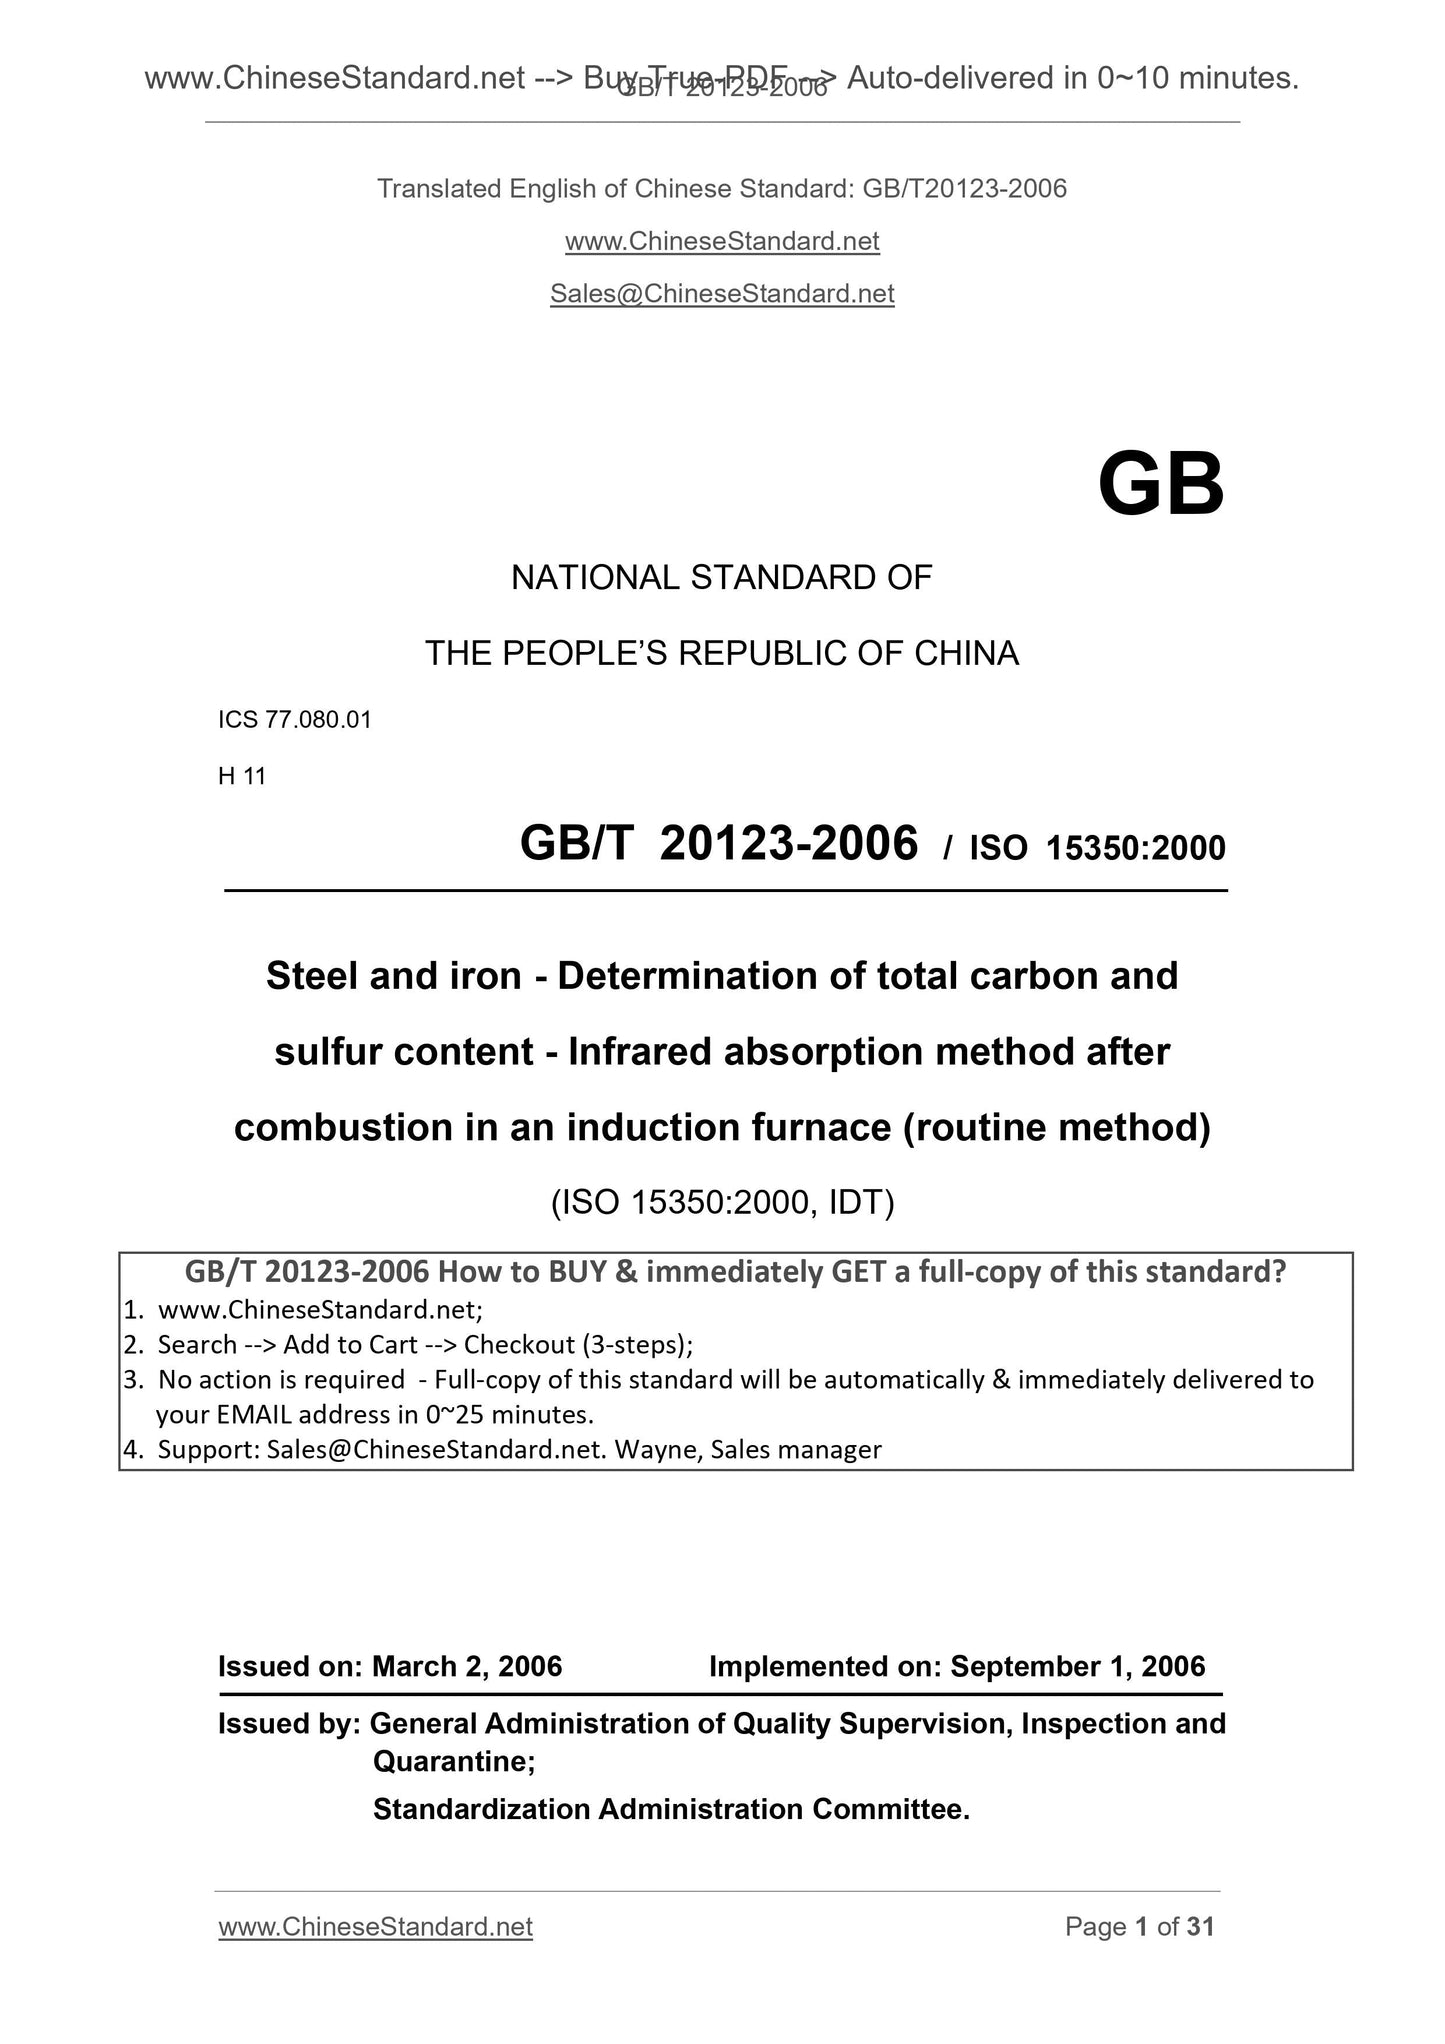 GB/T 20123-2006 Page 1